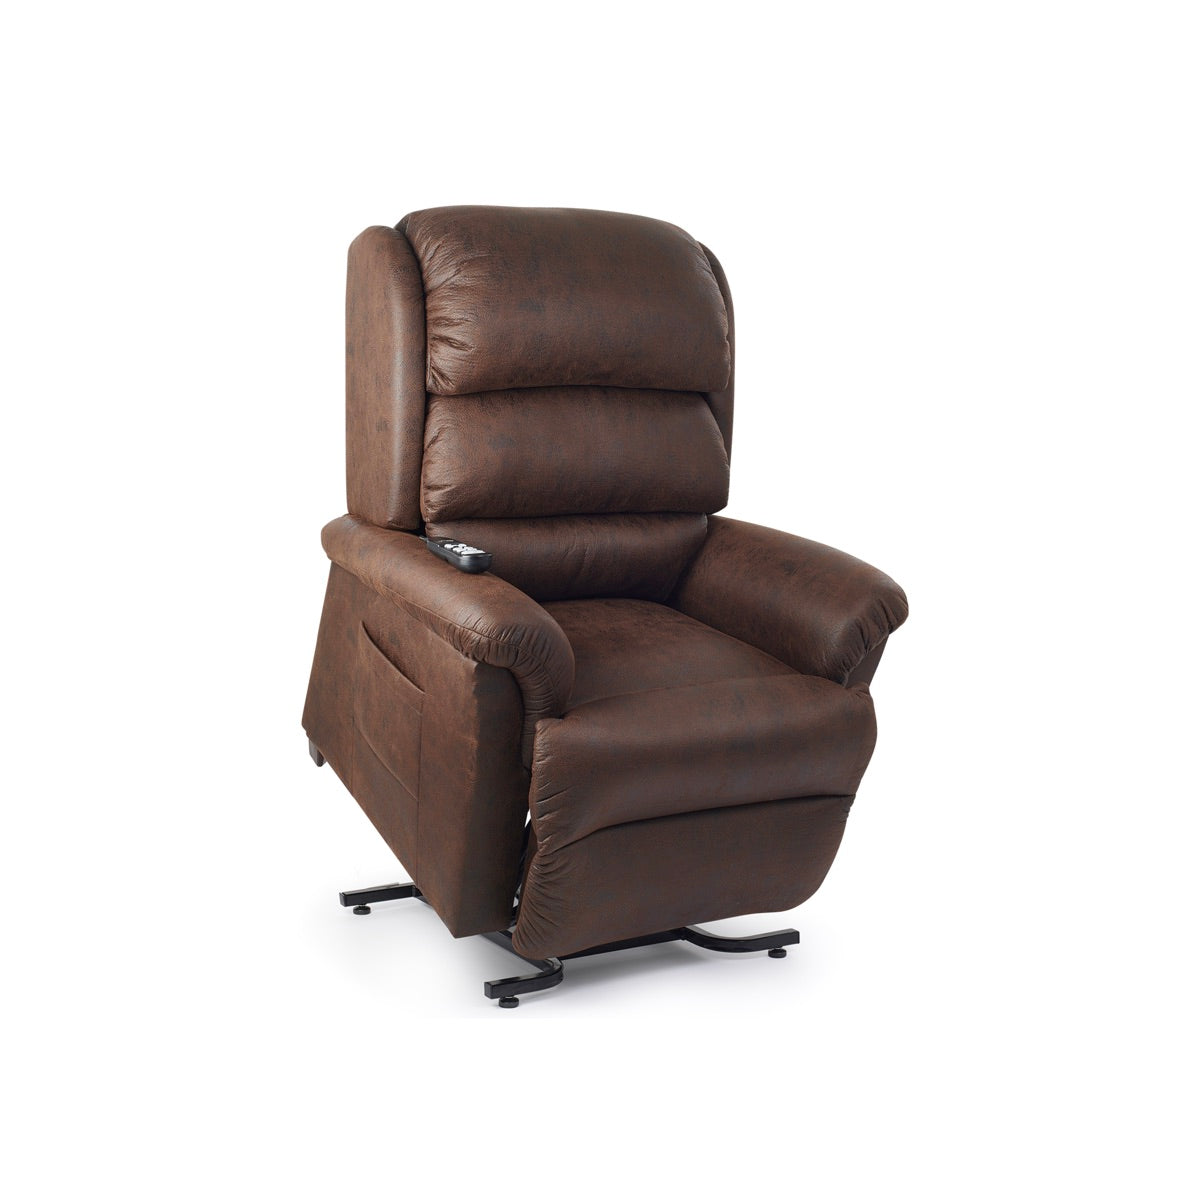 Saros Power Lift chair recliner, lifted, bourbon color